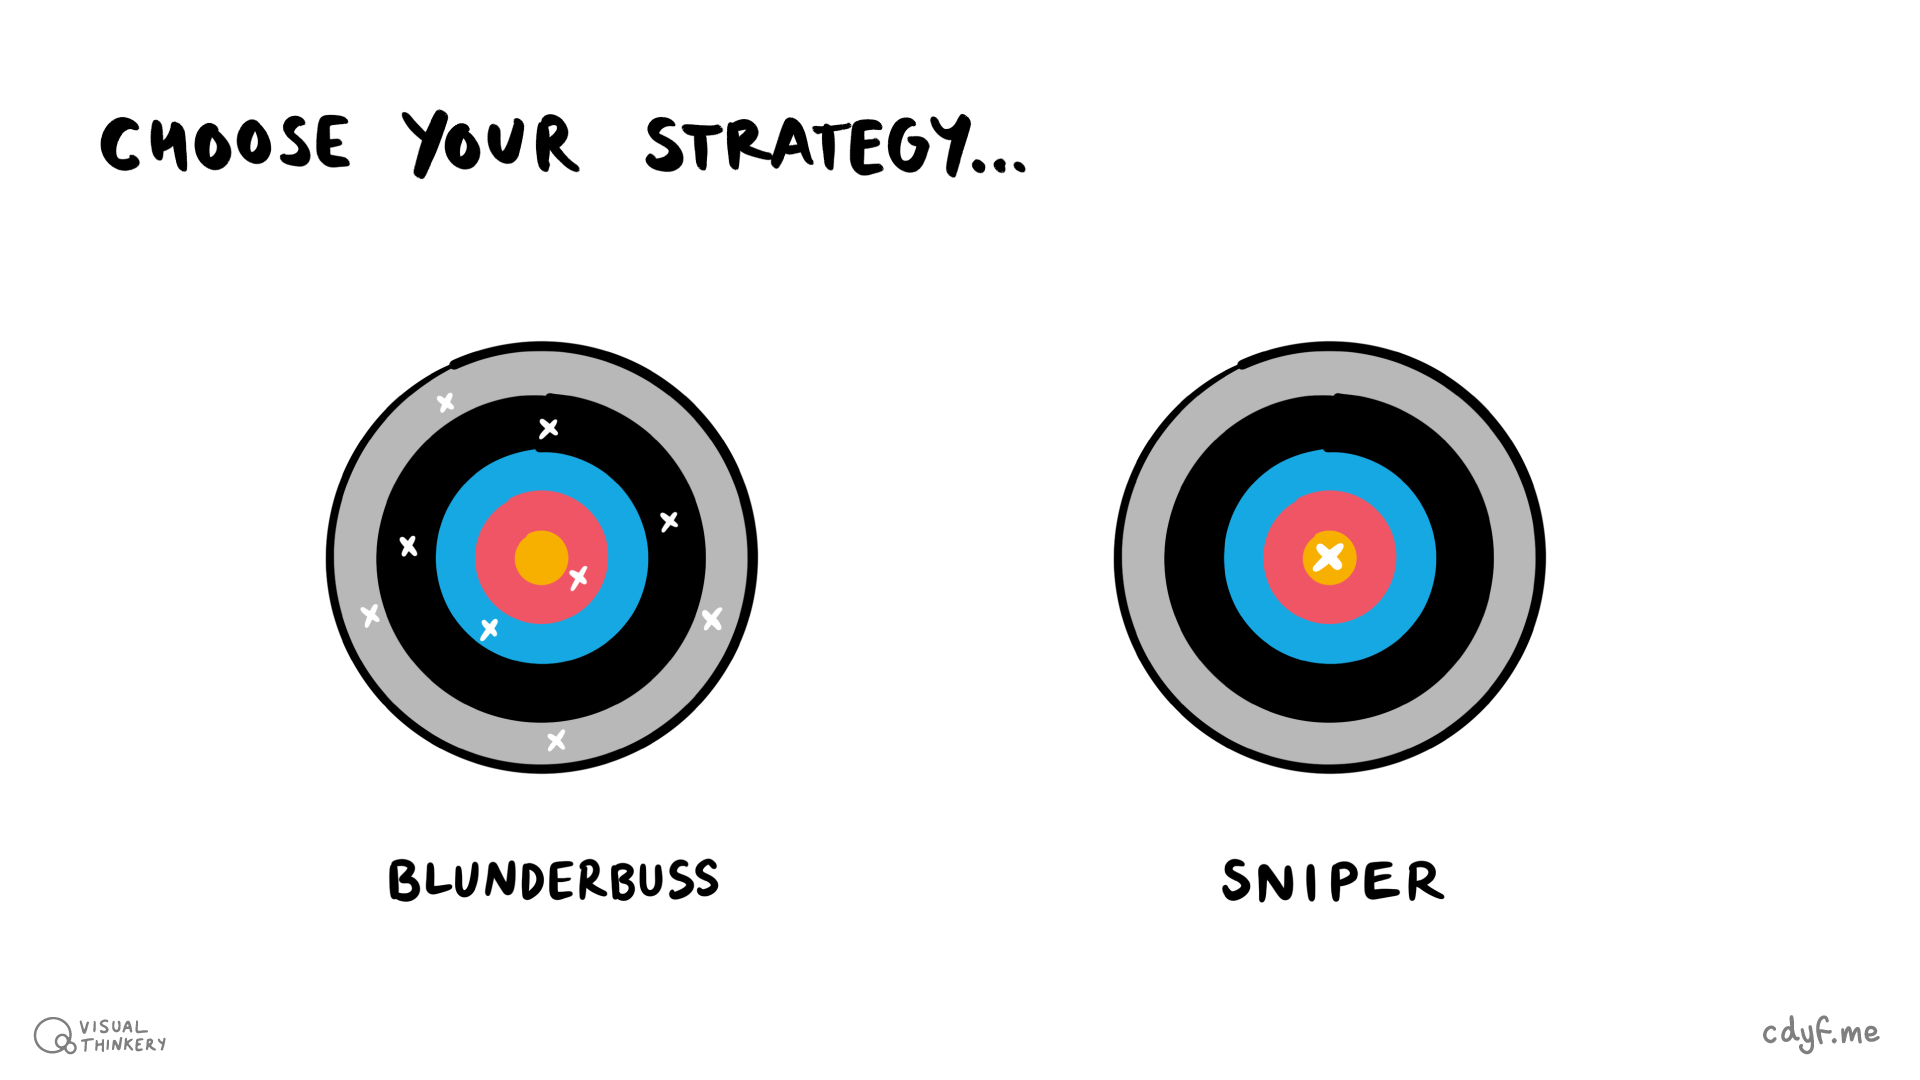 As you target employers, what will your strategy be? At one extreme you could optimise the quantity of your applications, aiming to do as many as you can. This is shown in the left of the picture by the blunderbuss (or scattergun) strategy. You make lots of applications but don’t target or tailor them much in the hope that some will hit the target if you point your weapon (that’s your CV) in approximately the general direction of your target employer. At the other extreme you could optimise the quality of your applications by spending more time researching the employer and carefully aiming your shots like a sniper would, in the right of the figure. Which strategy is best? Blunderbuss sketch by Visual Thinkery is licensed under CC-BY-ND